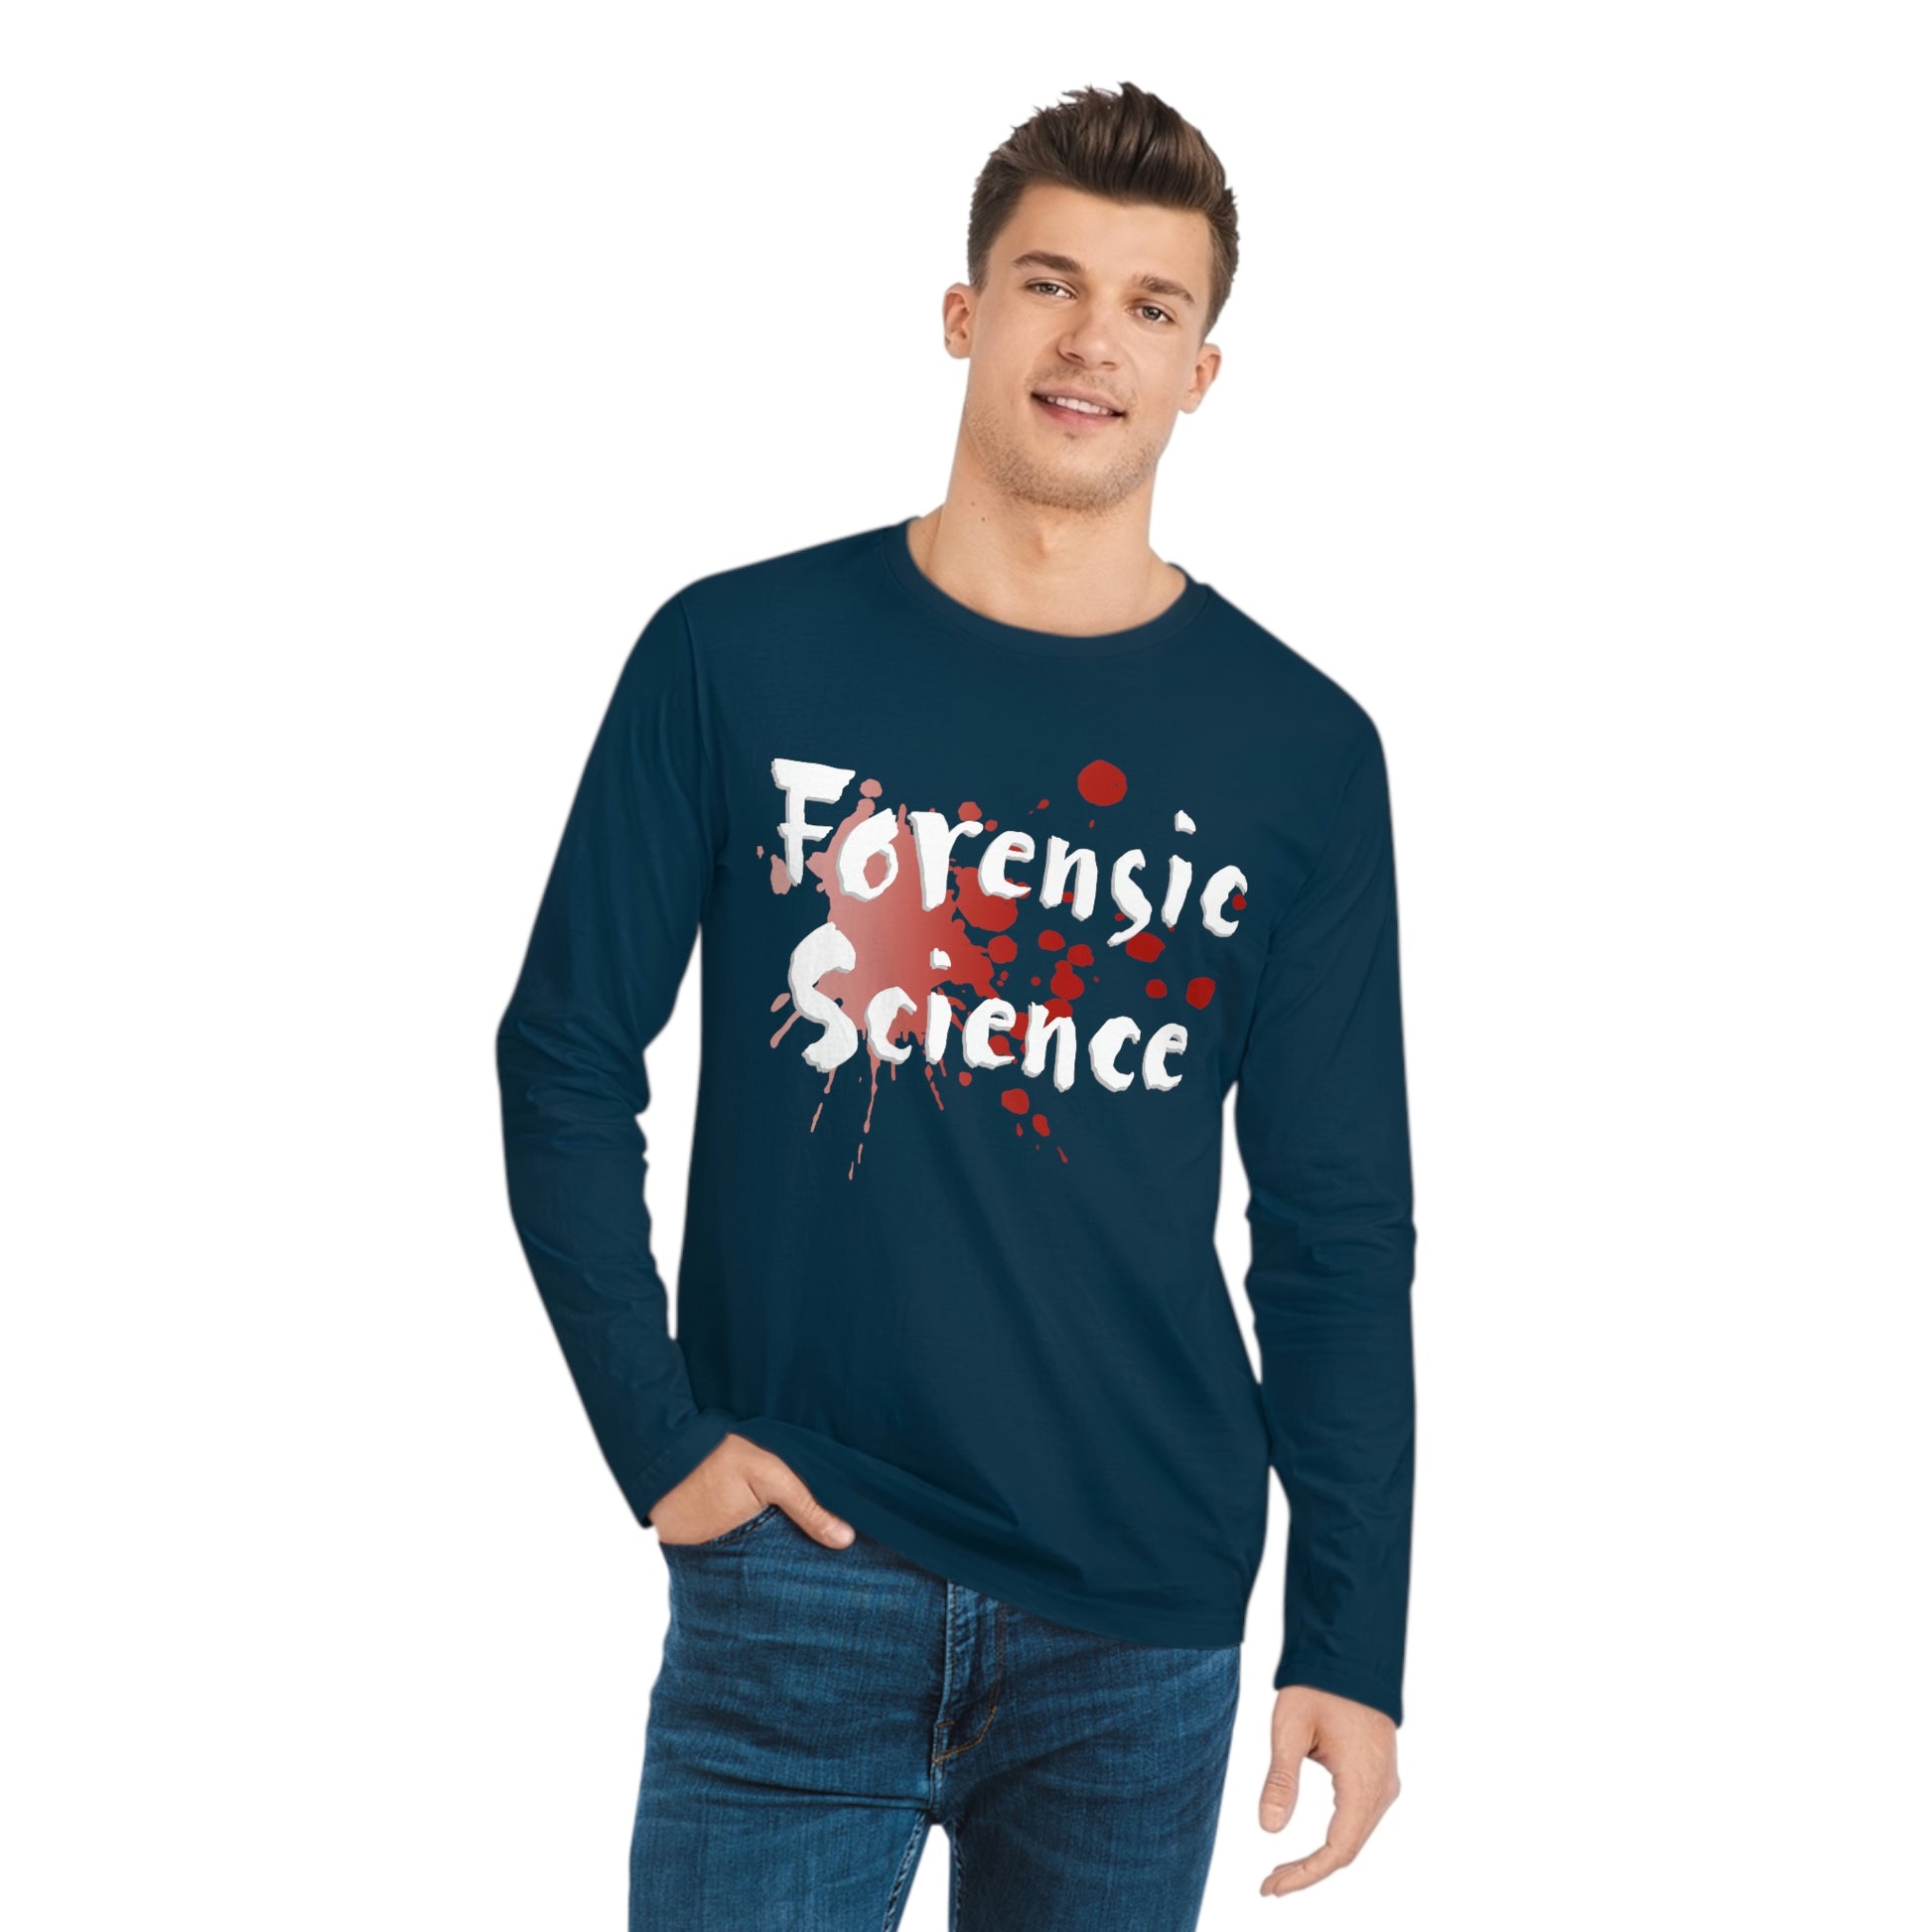 Made from 100% organic, ring-spun, combed cotton for a luxurious feeling of comfort. These personalized long sleeve shirts feature a medium fabric with a medium fit and a set in sleeve, providing a fantastic overall feeling for any time of the day.